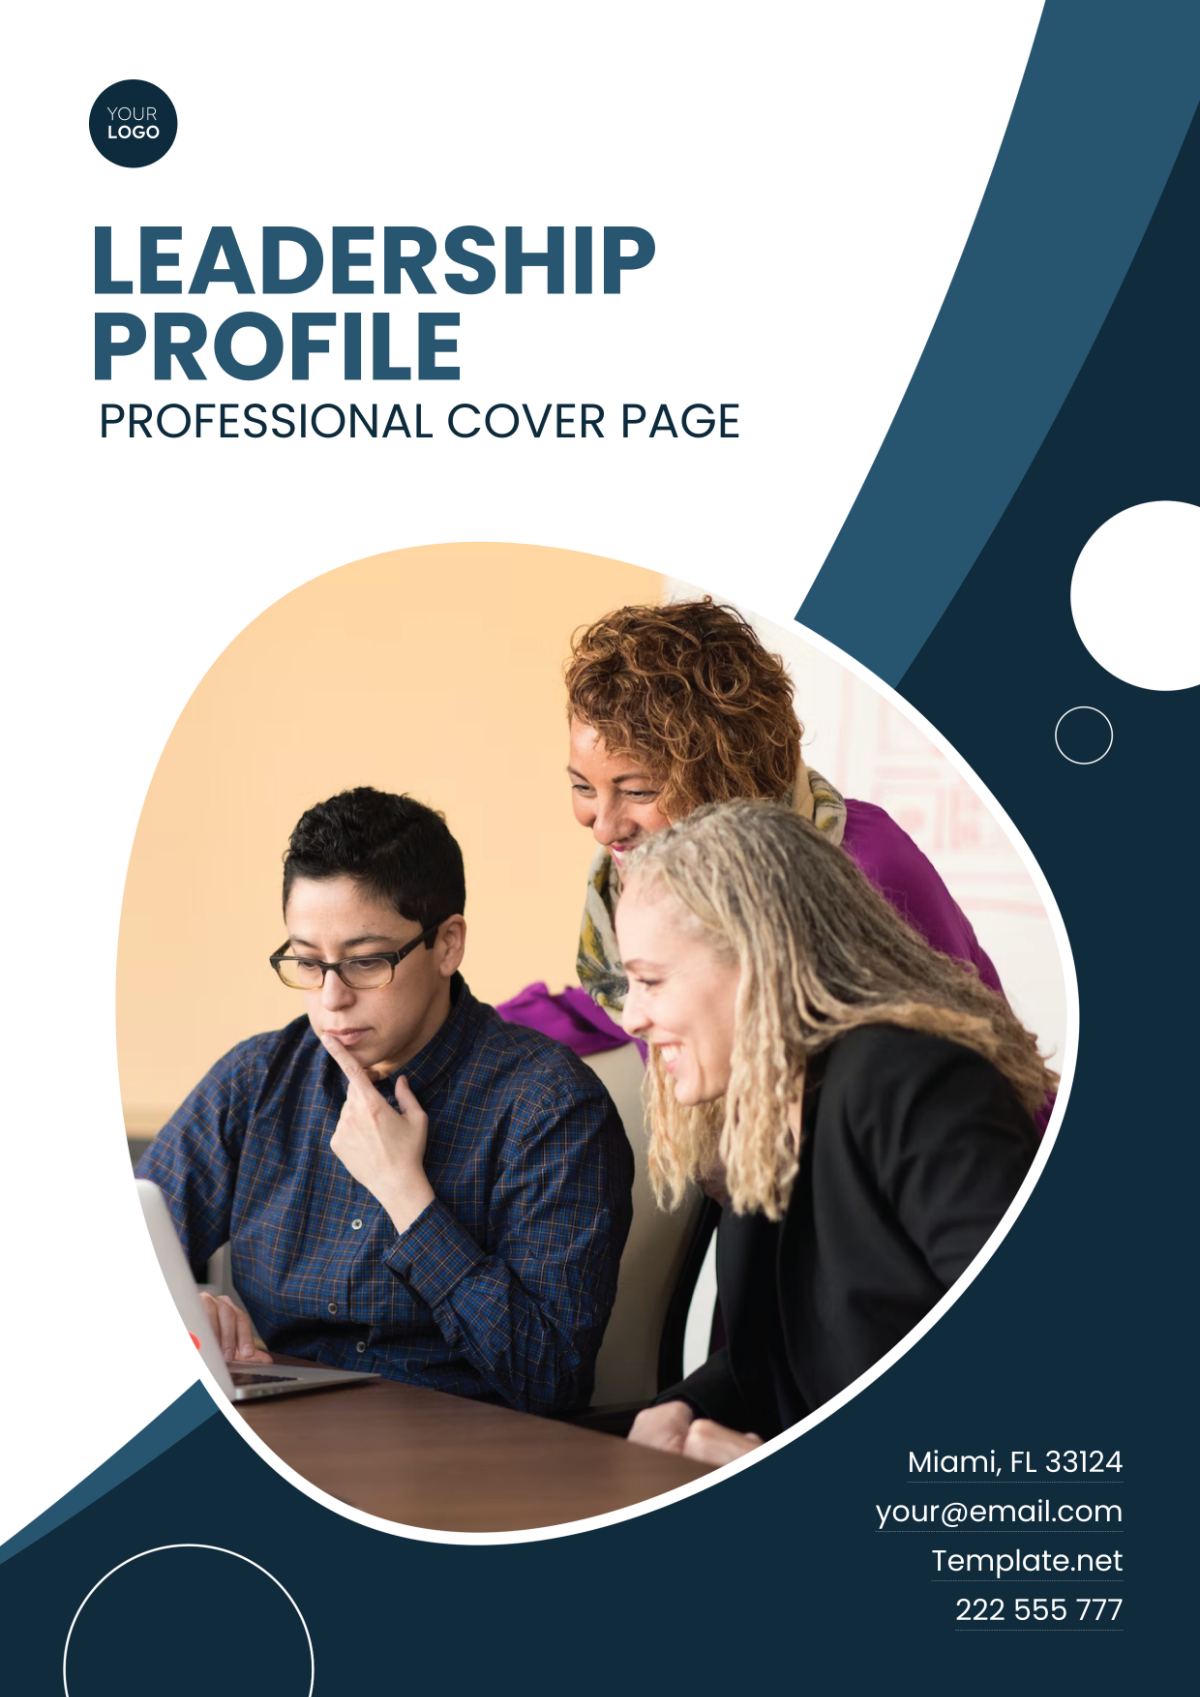 Free Leadership Profile Professional Cover Page Template